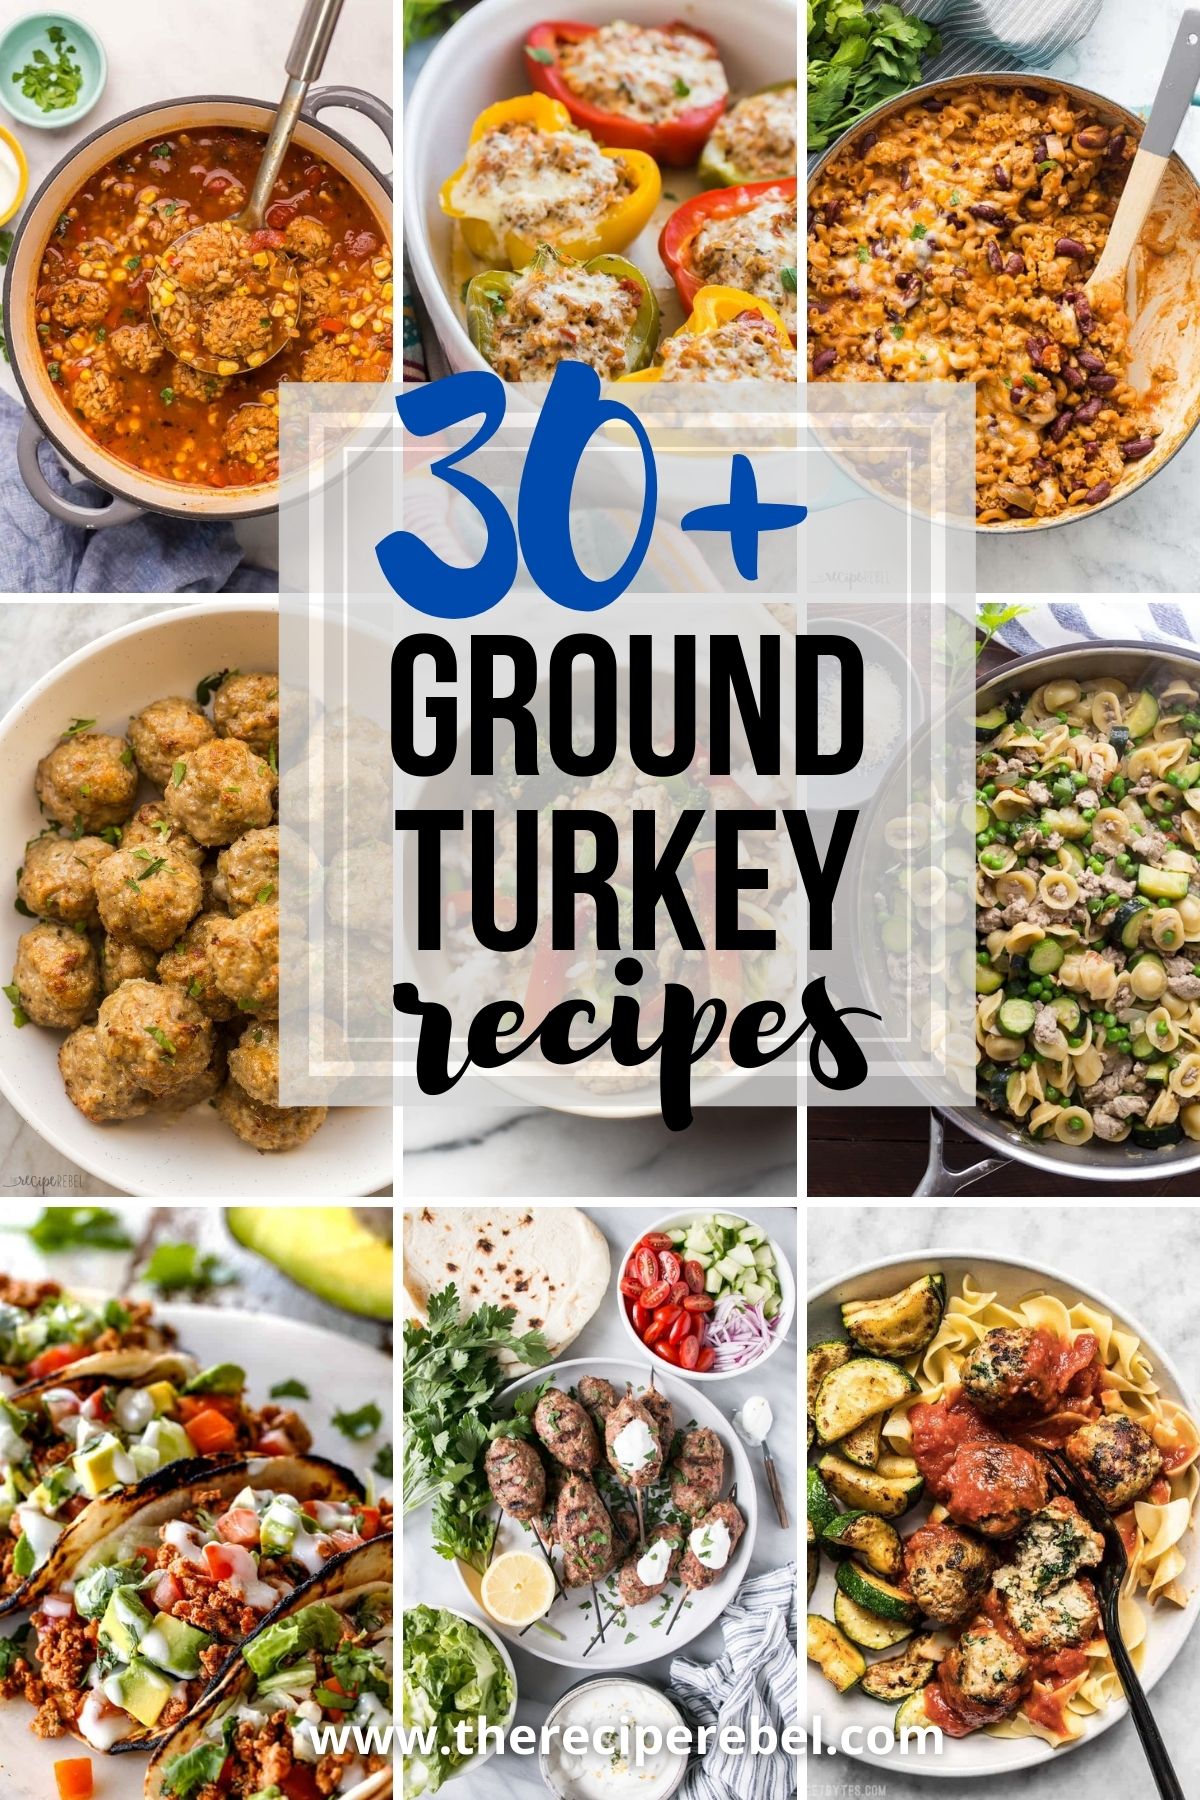 Title image for 30+ Ground Turkey Recipes